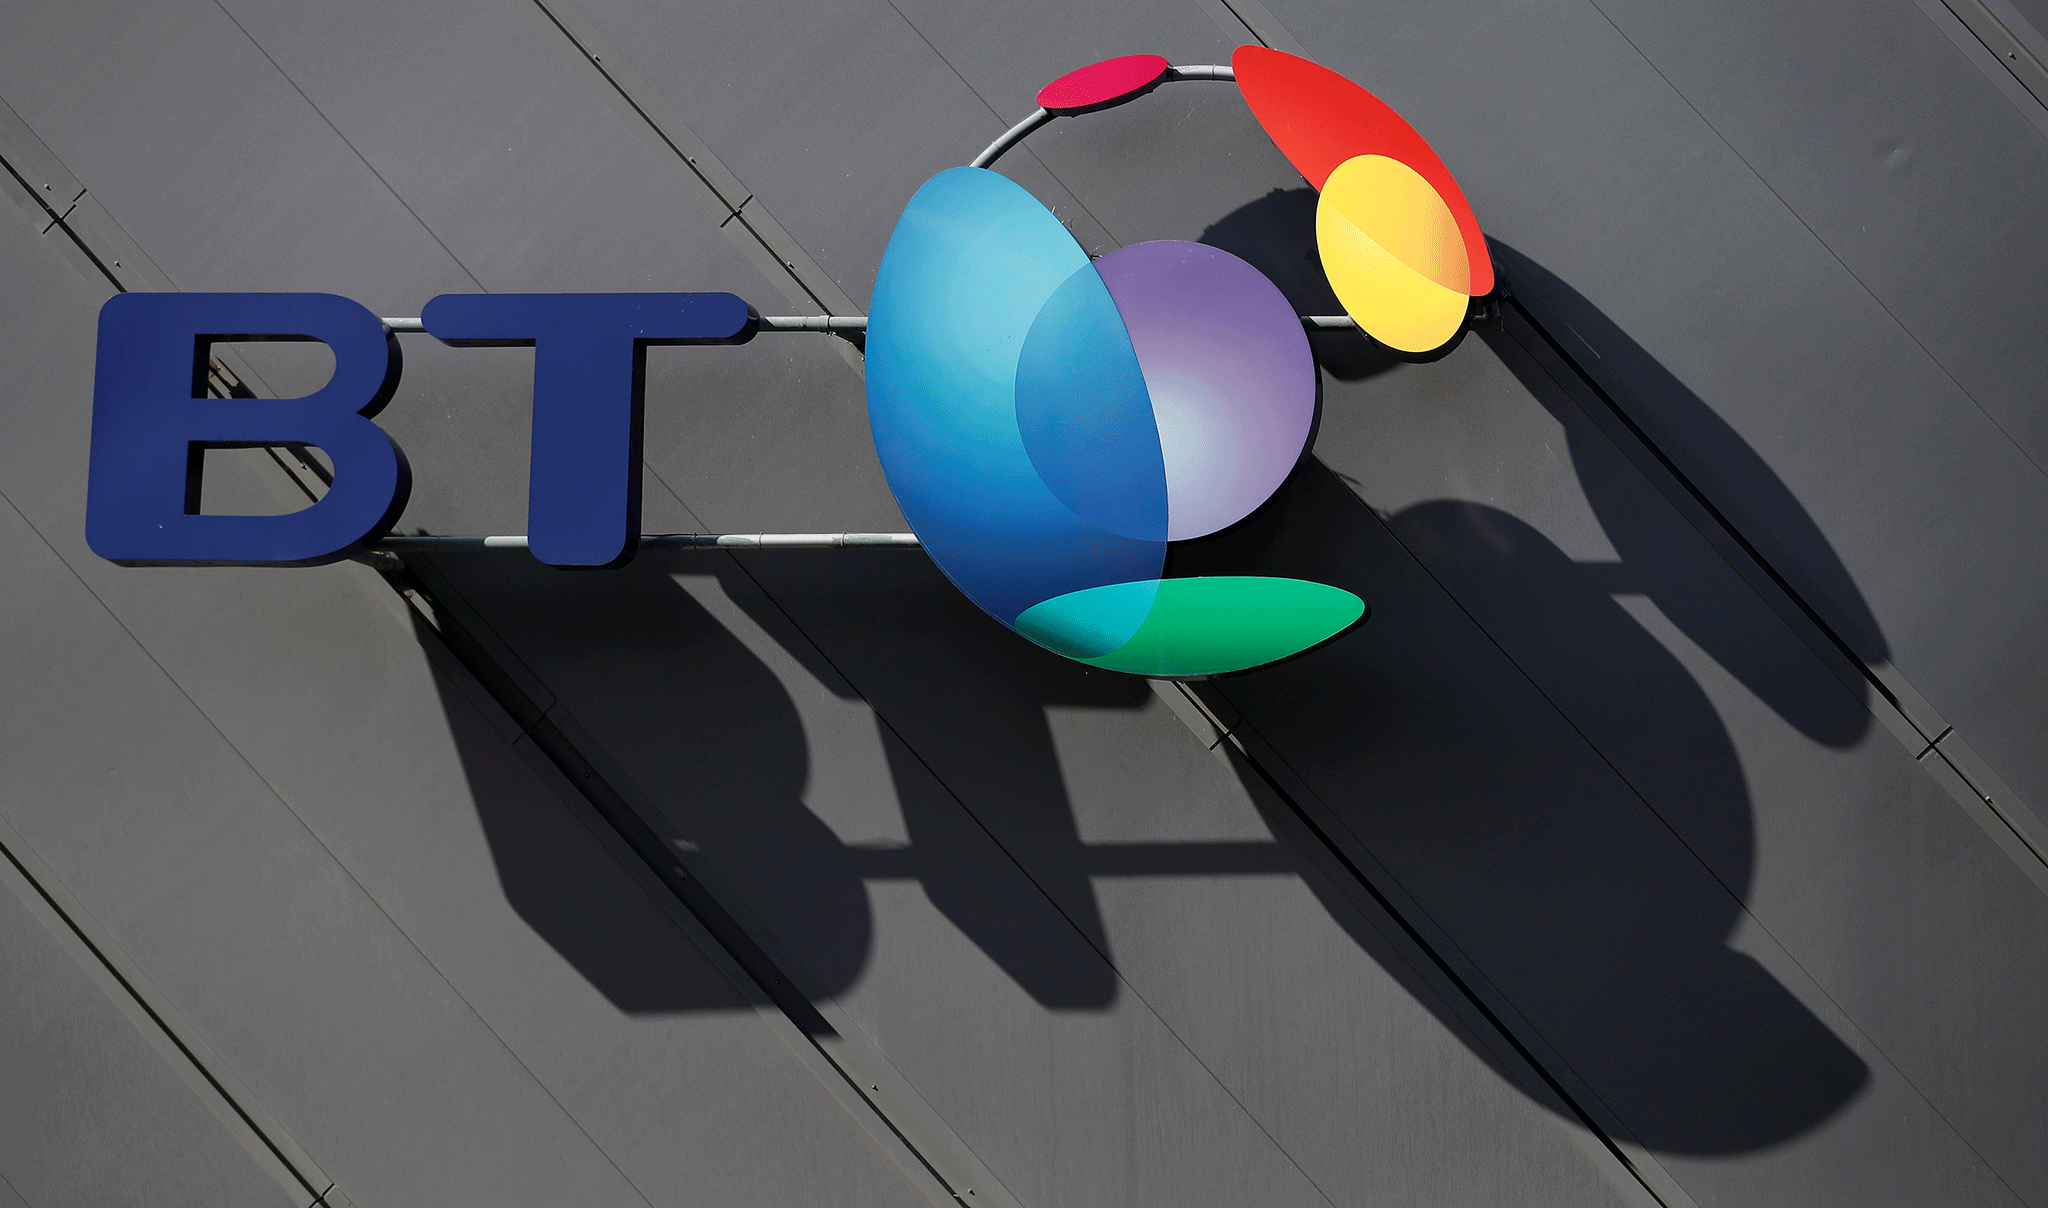 BT reaches deal with regulator Ofcom to legally separate Openreach